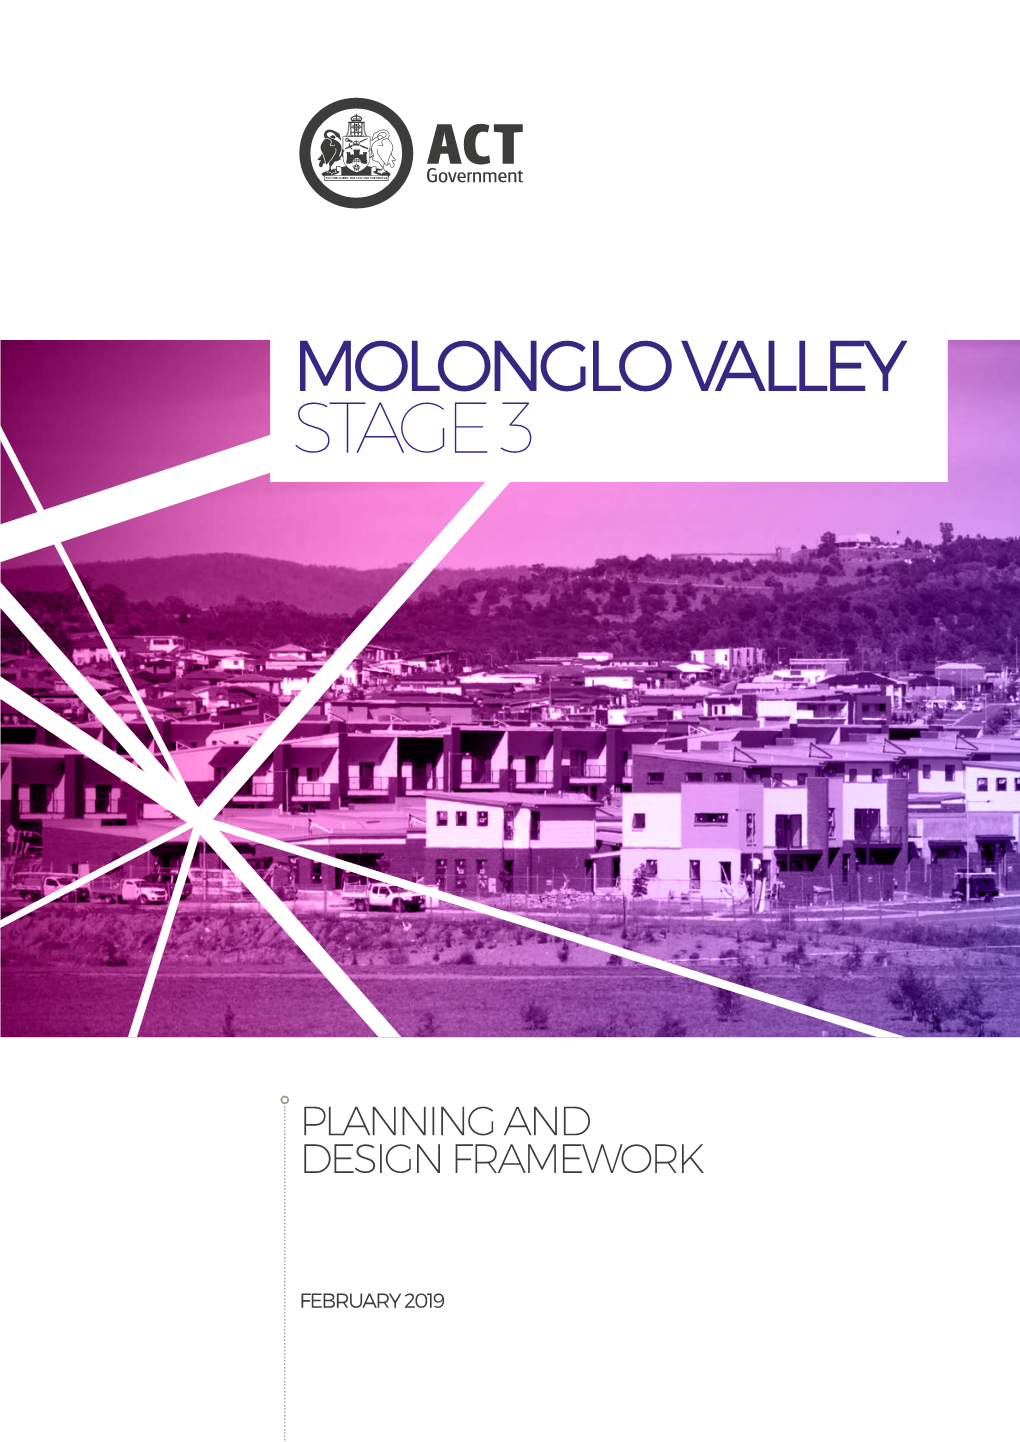 Molonglo Valley Stage 3 Planning and Design Framework